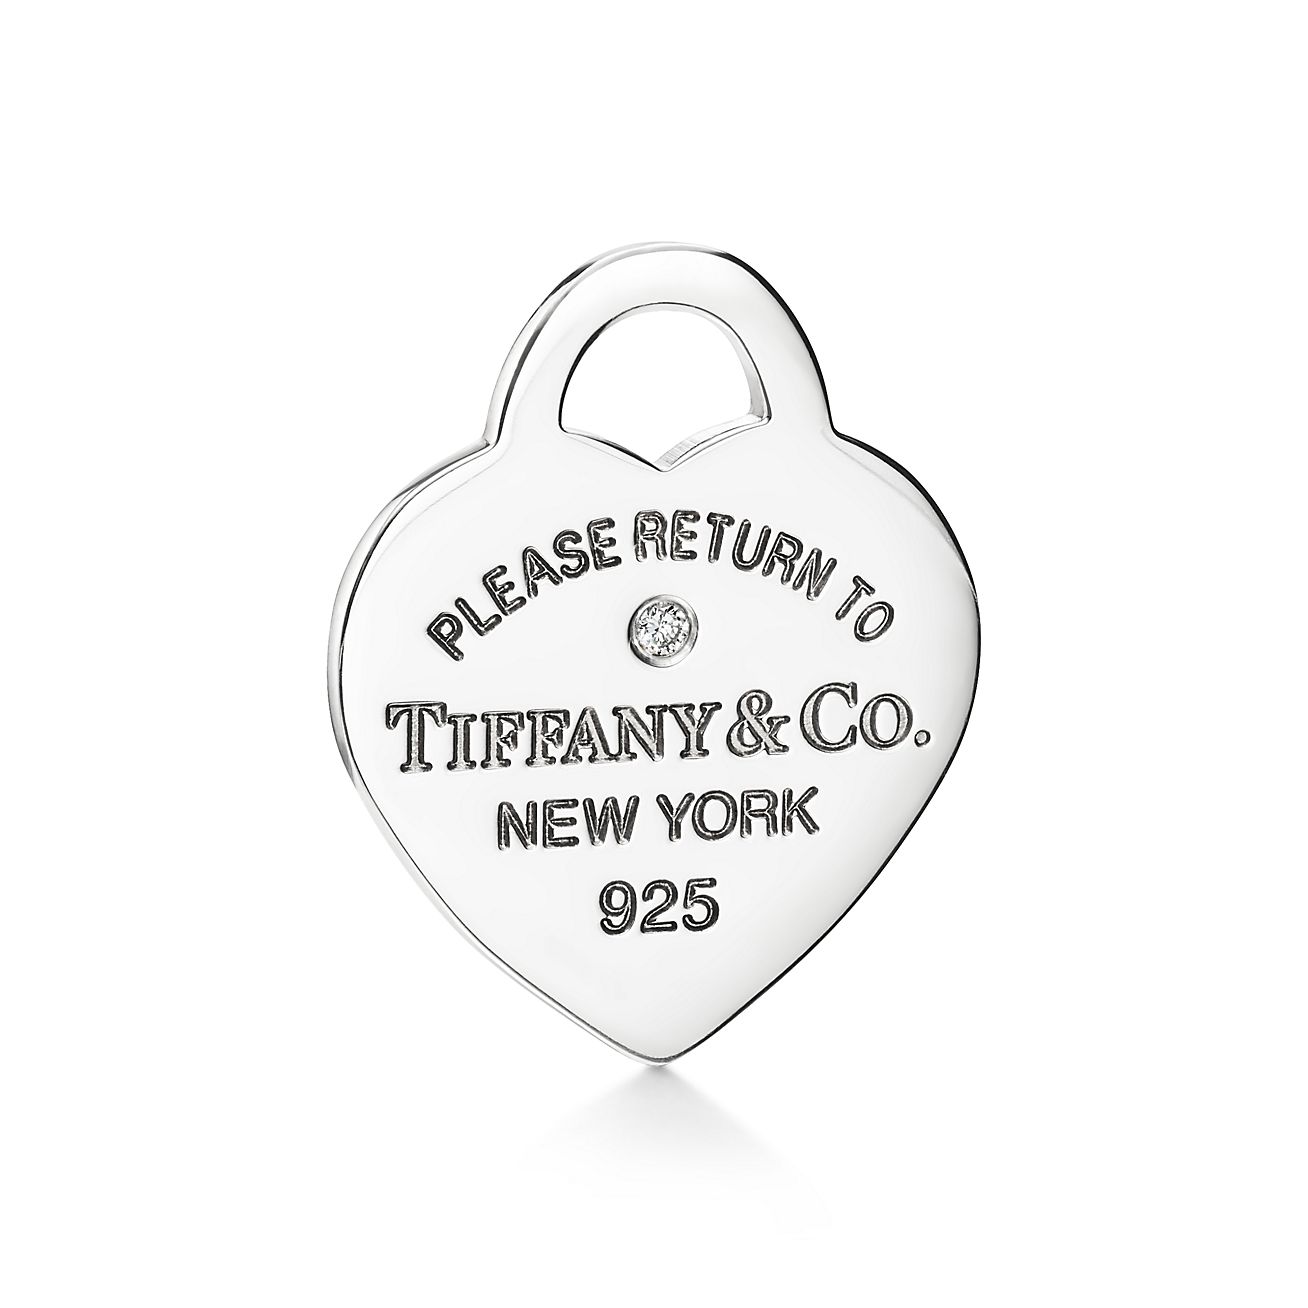 Sale Tiffany Return to Tiffany Heart Tag with Key Pendant For Tiffany & Co.  Necklace & Pendant